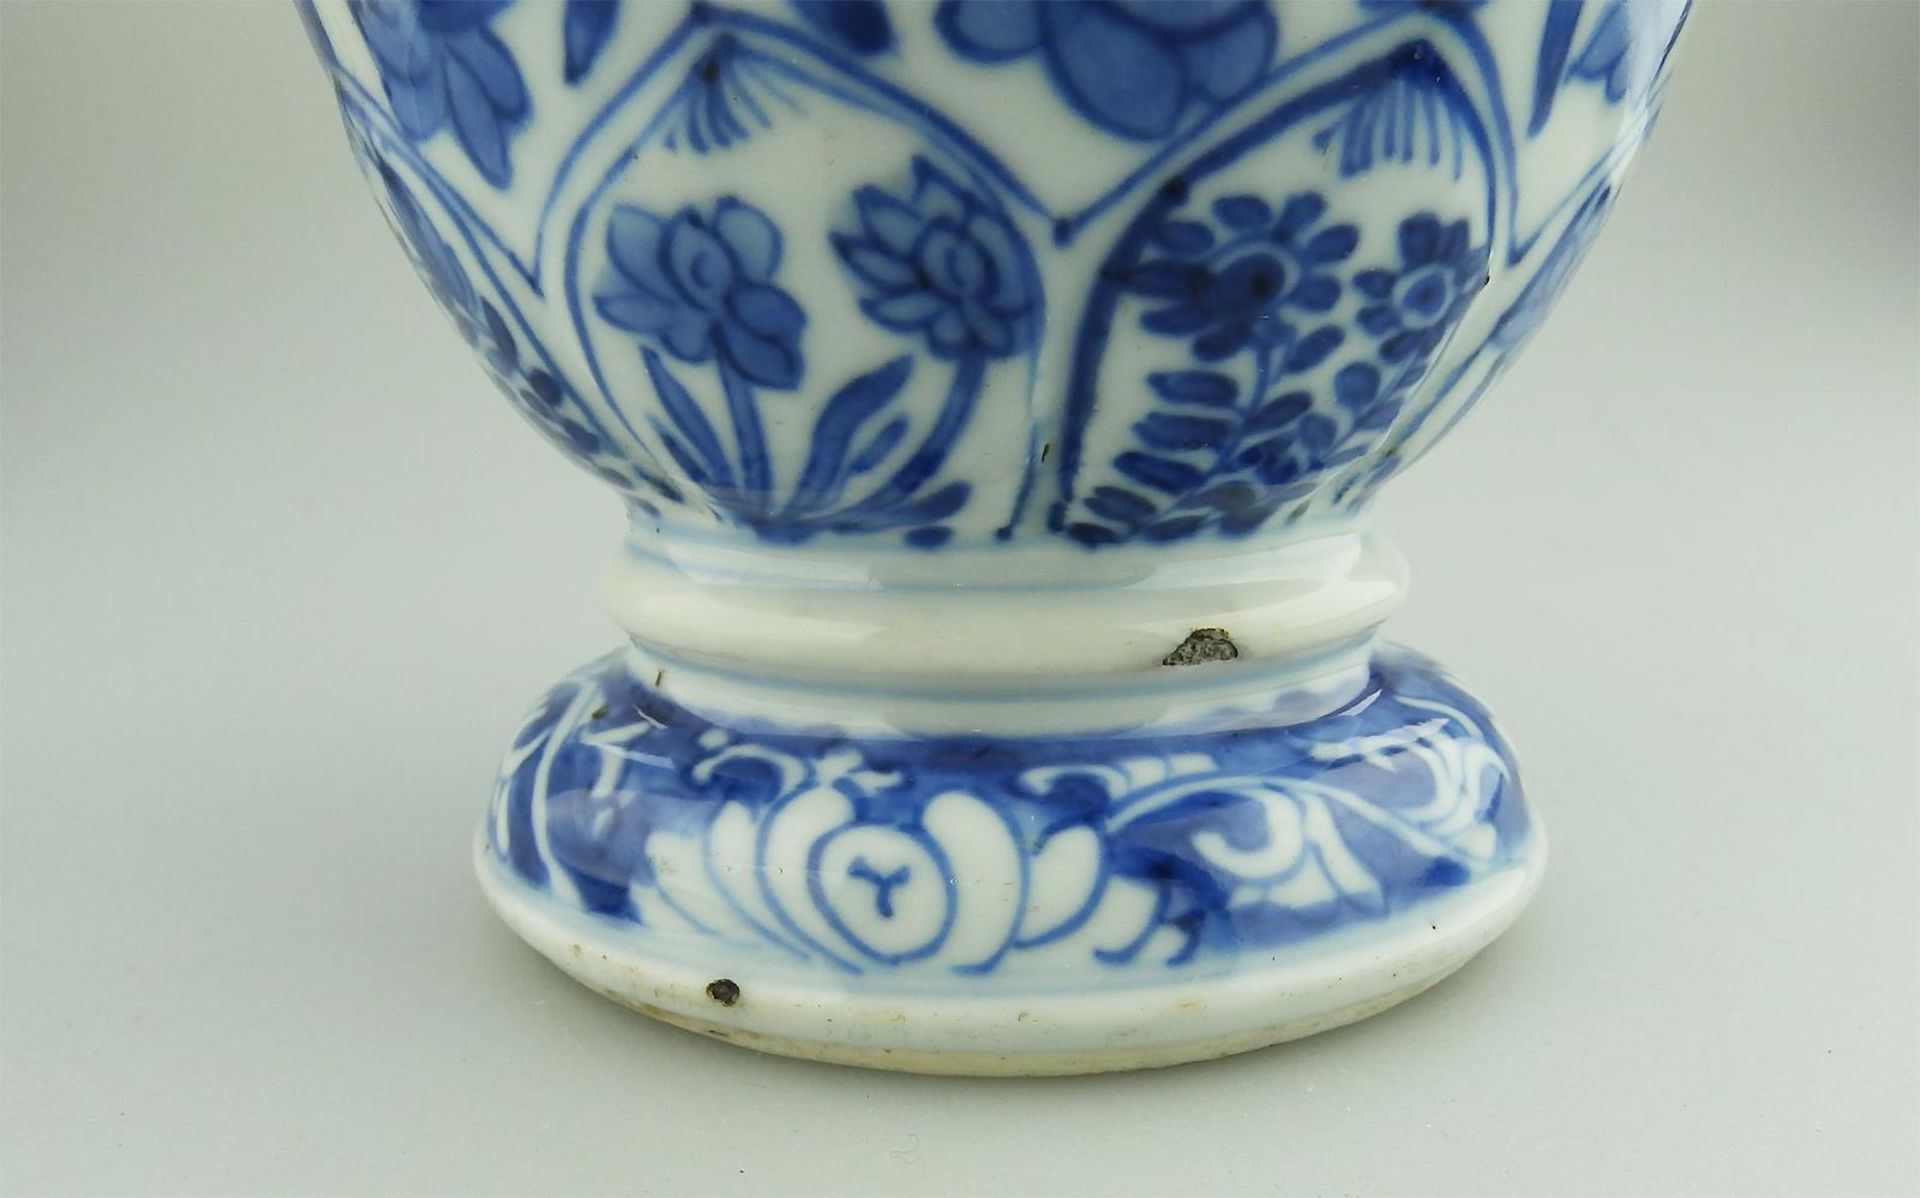 A very fine Chinese porcelain hand painted Vase C.17thC - Image 6 of 10